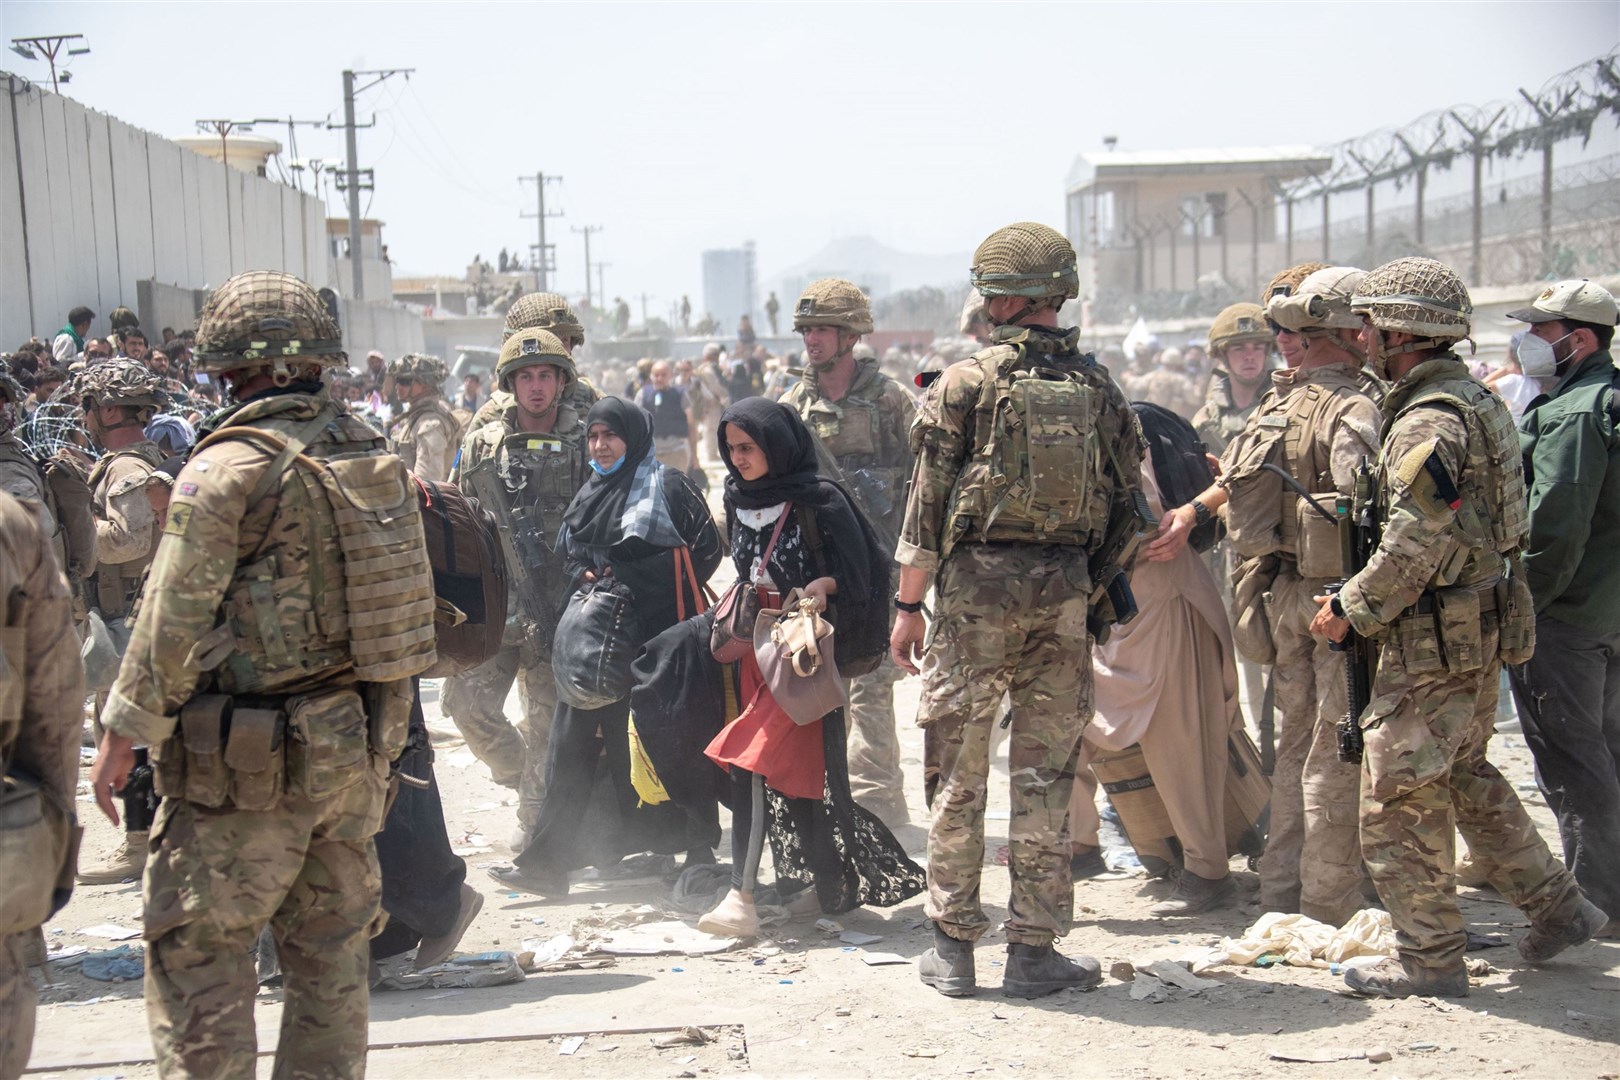 Following the Taliban gaining control of Afghanistan in summer 2021, the British government evacuated 15,000 people from the country (MoD/PA)